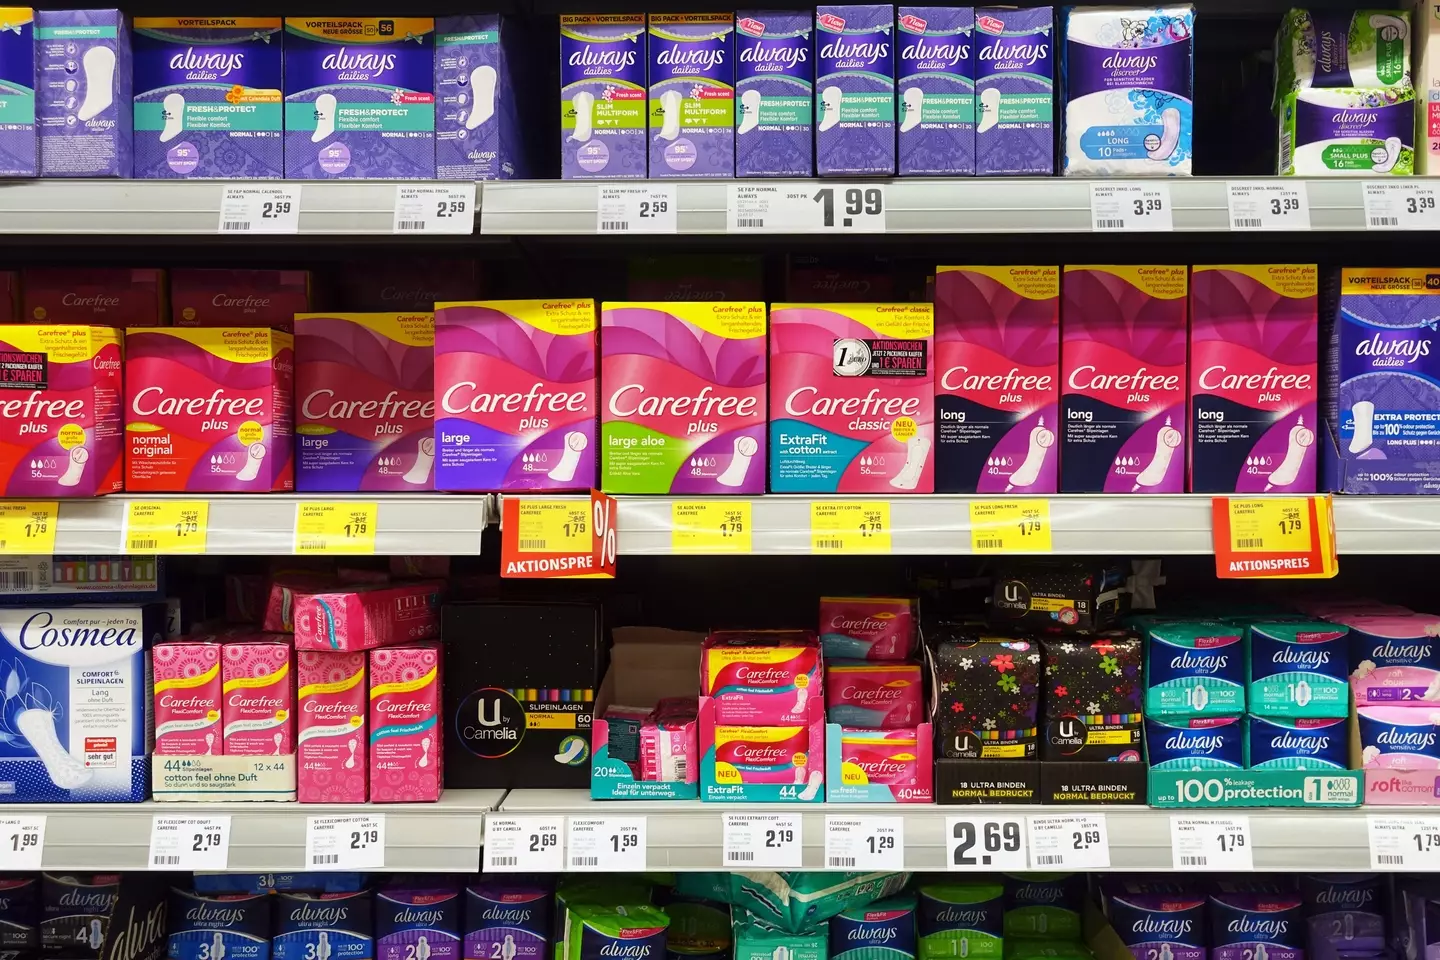 Period products on the shelves.